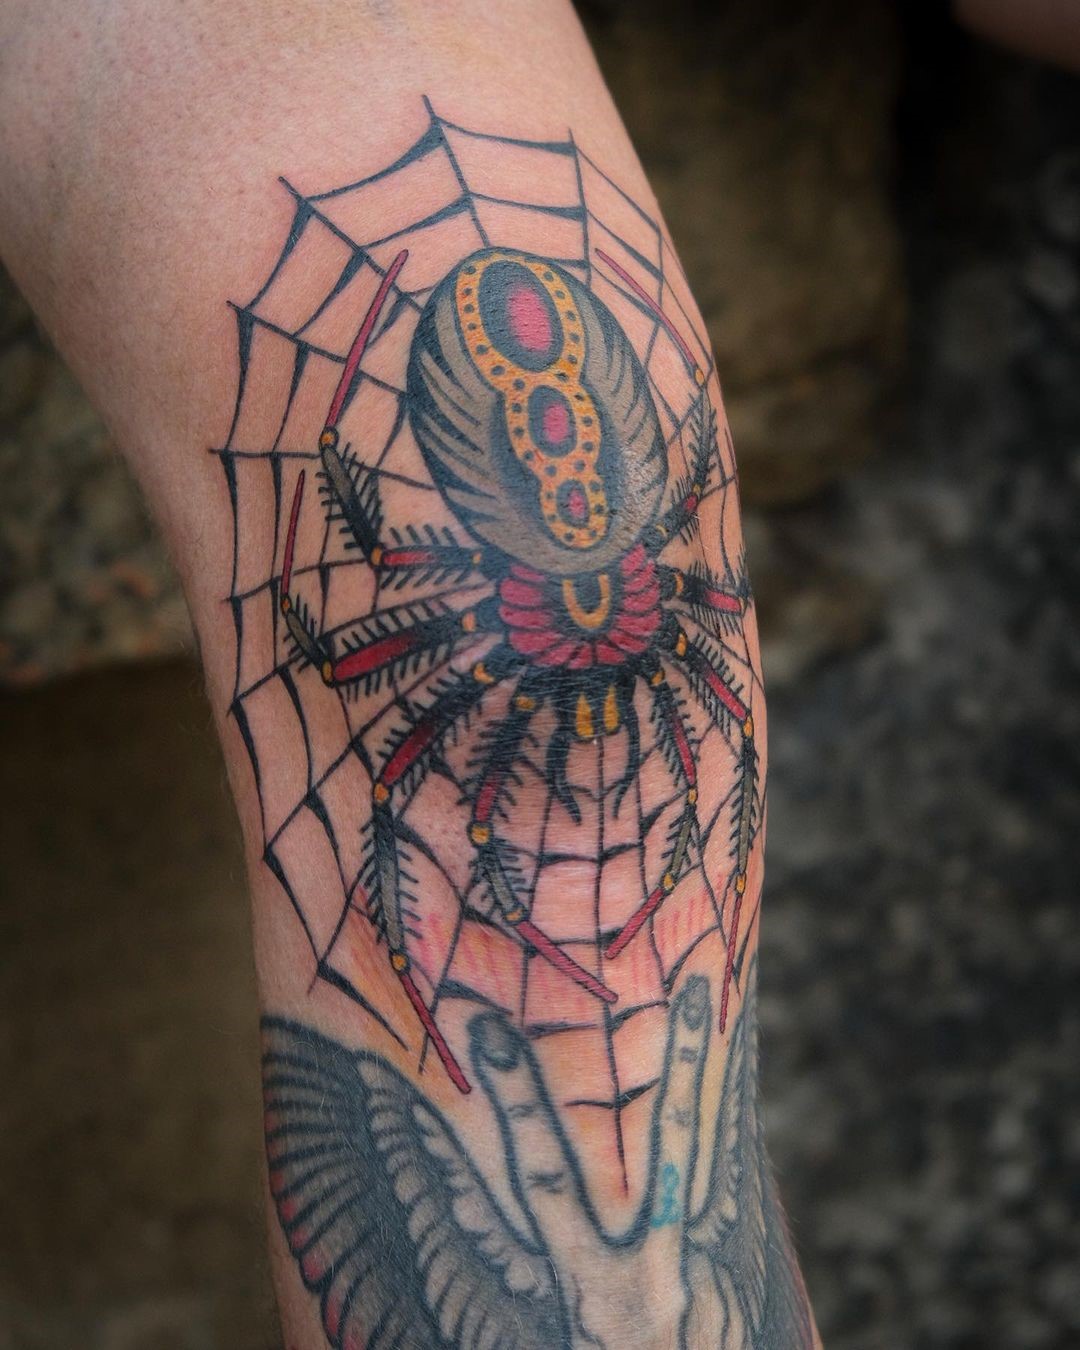 Loud & Colorful Spider Tattoo 